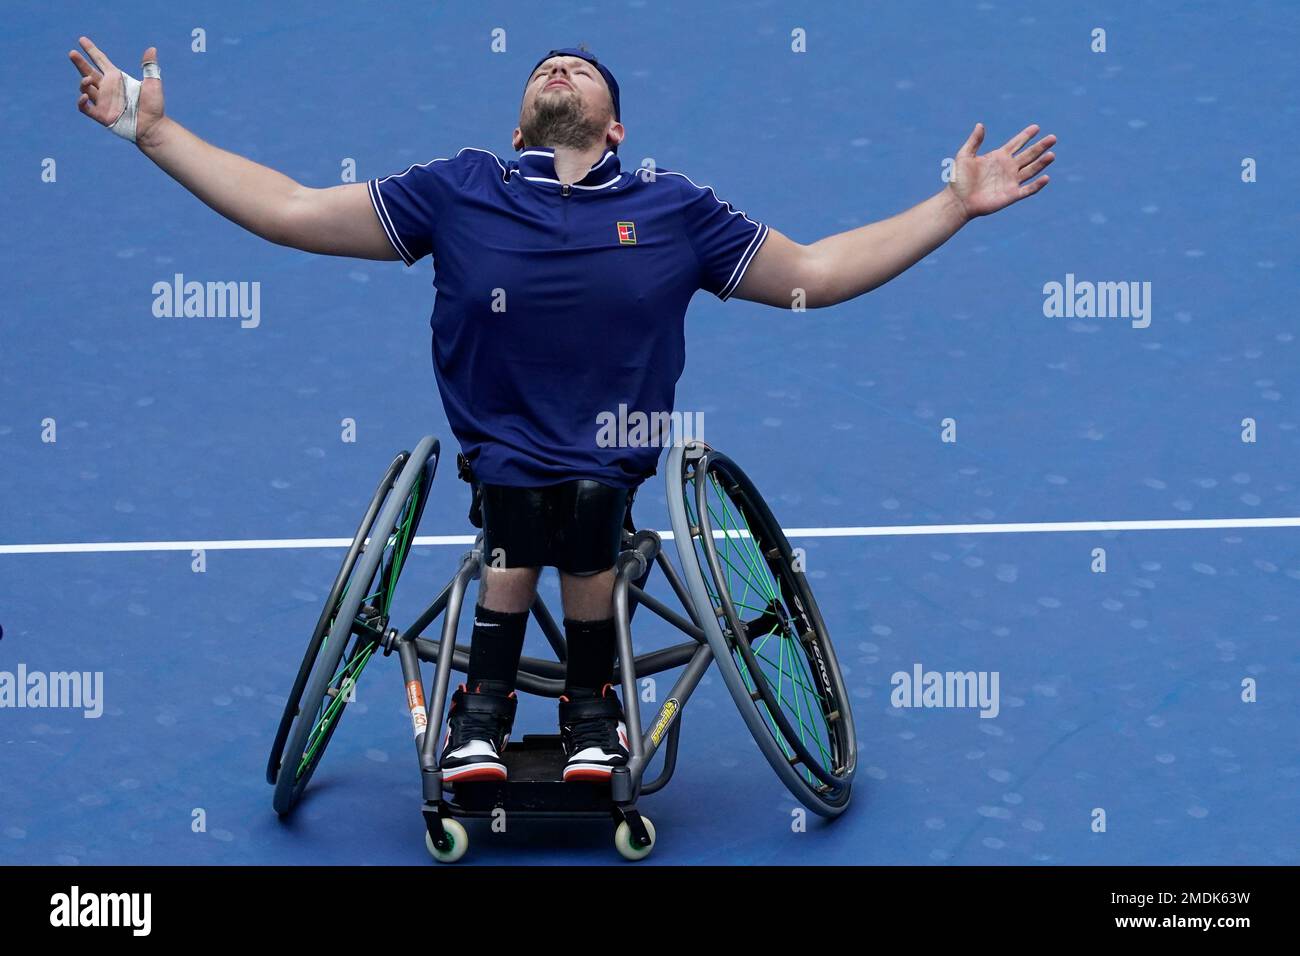 Dylan Alcott, of Australia, reacts after defeating Niels Vink, of the  Netherlands, during the men's wheelchair quad singles final at the U.S.  Open tennis tournament in New York, Sunday, Sept. 12, 2021. (